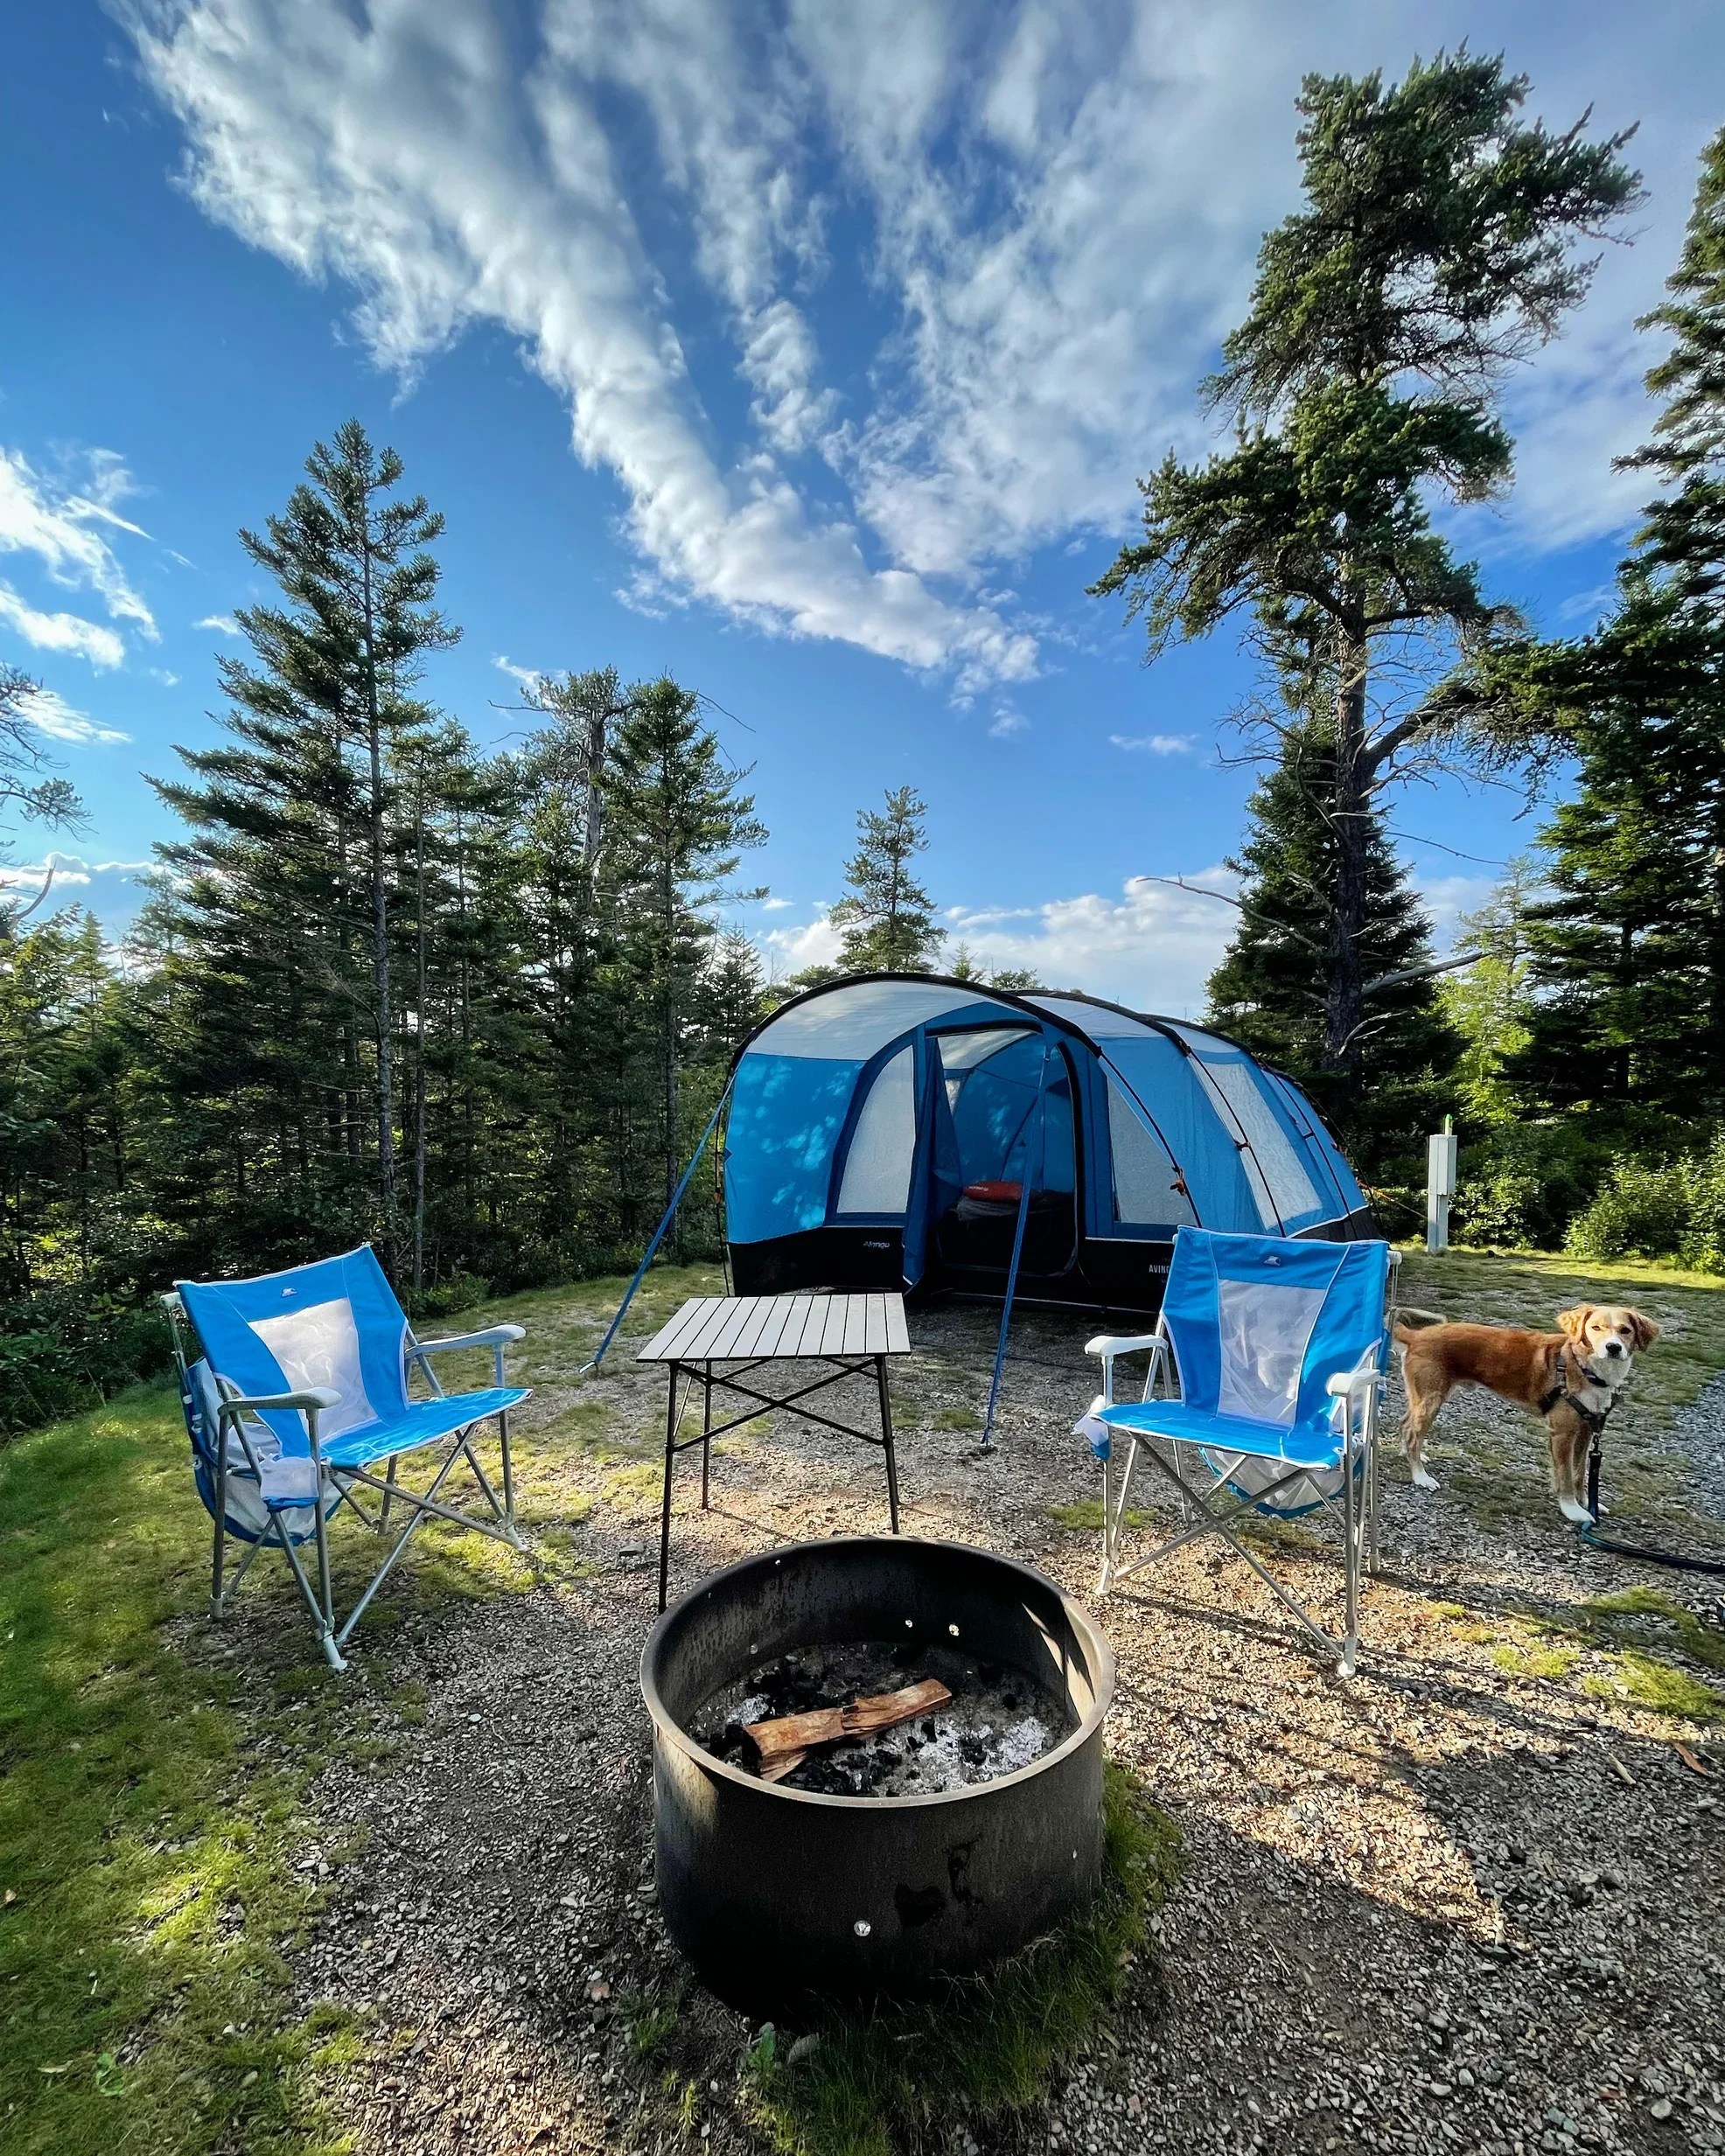 Blue tent and camping chairs at a campsite with a fire pit surrounded by evergreen trees.